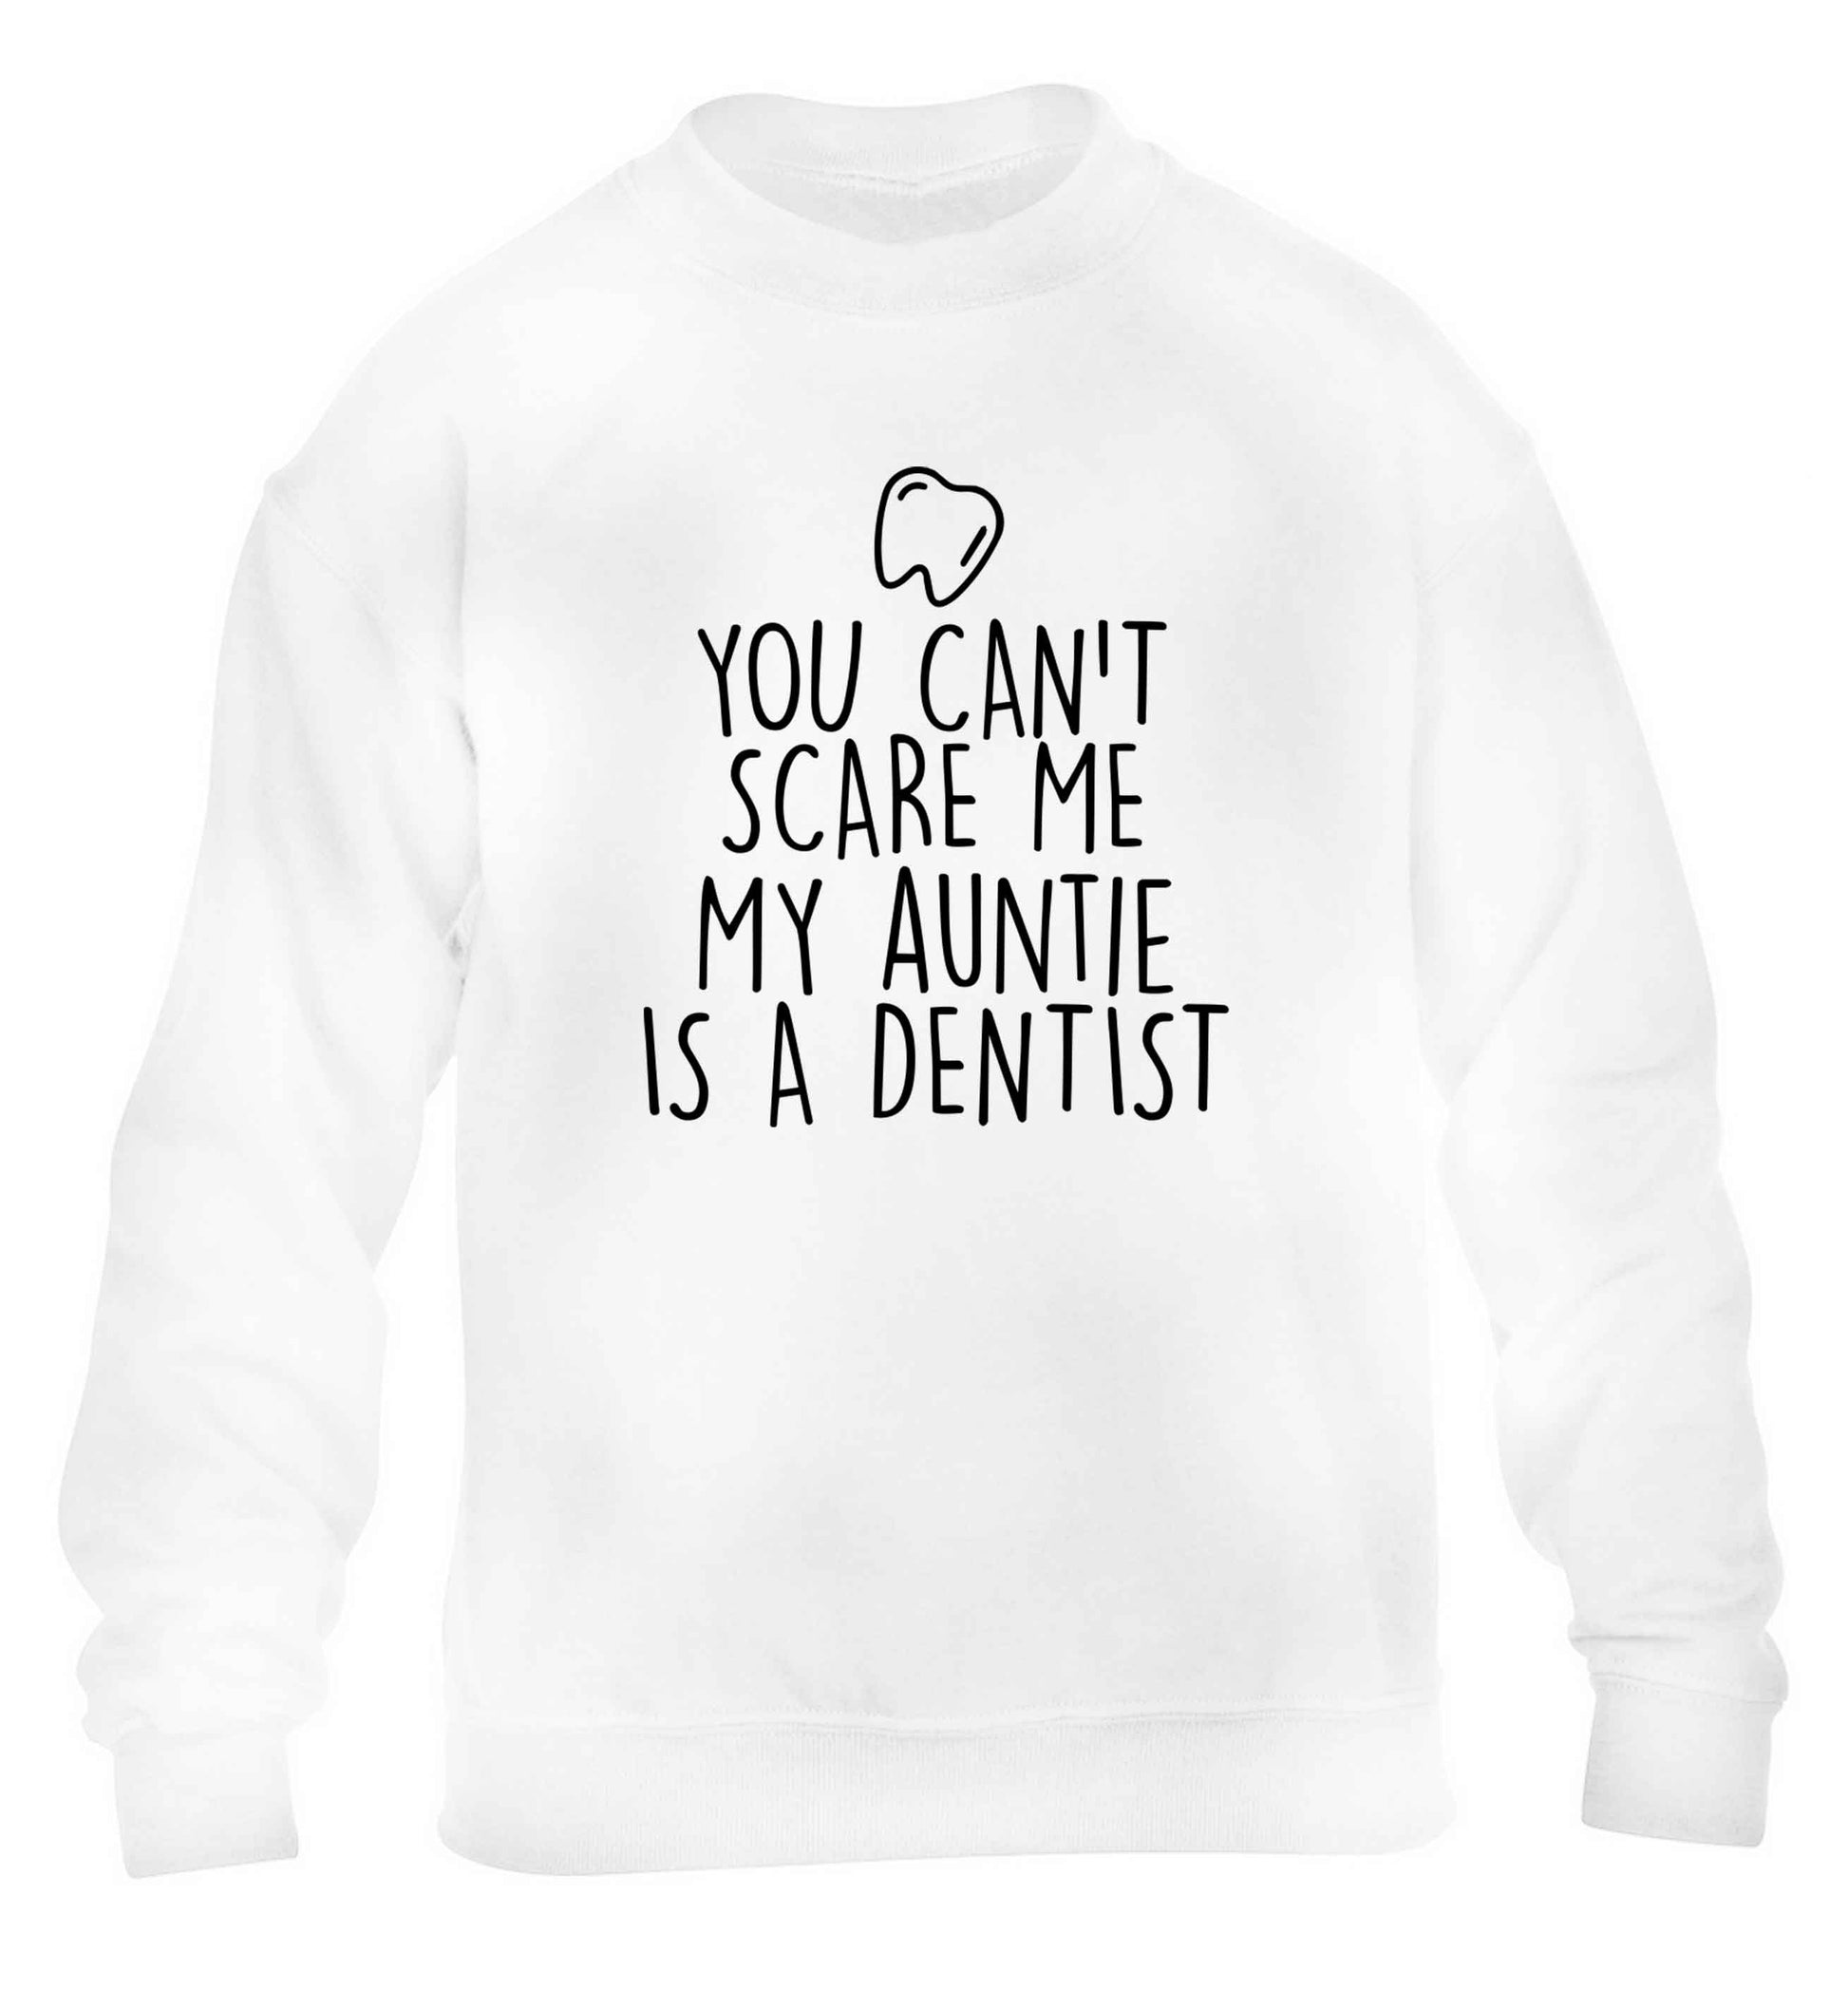 You can't scare me my auntie is a dentist children's white sweater 12-13 Years